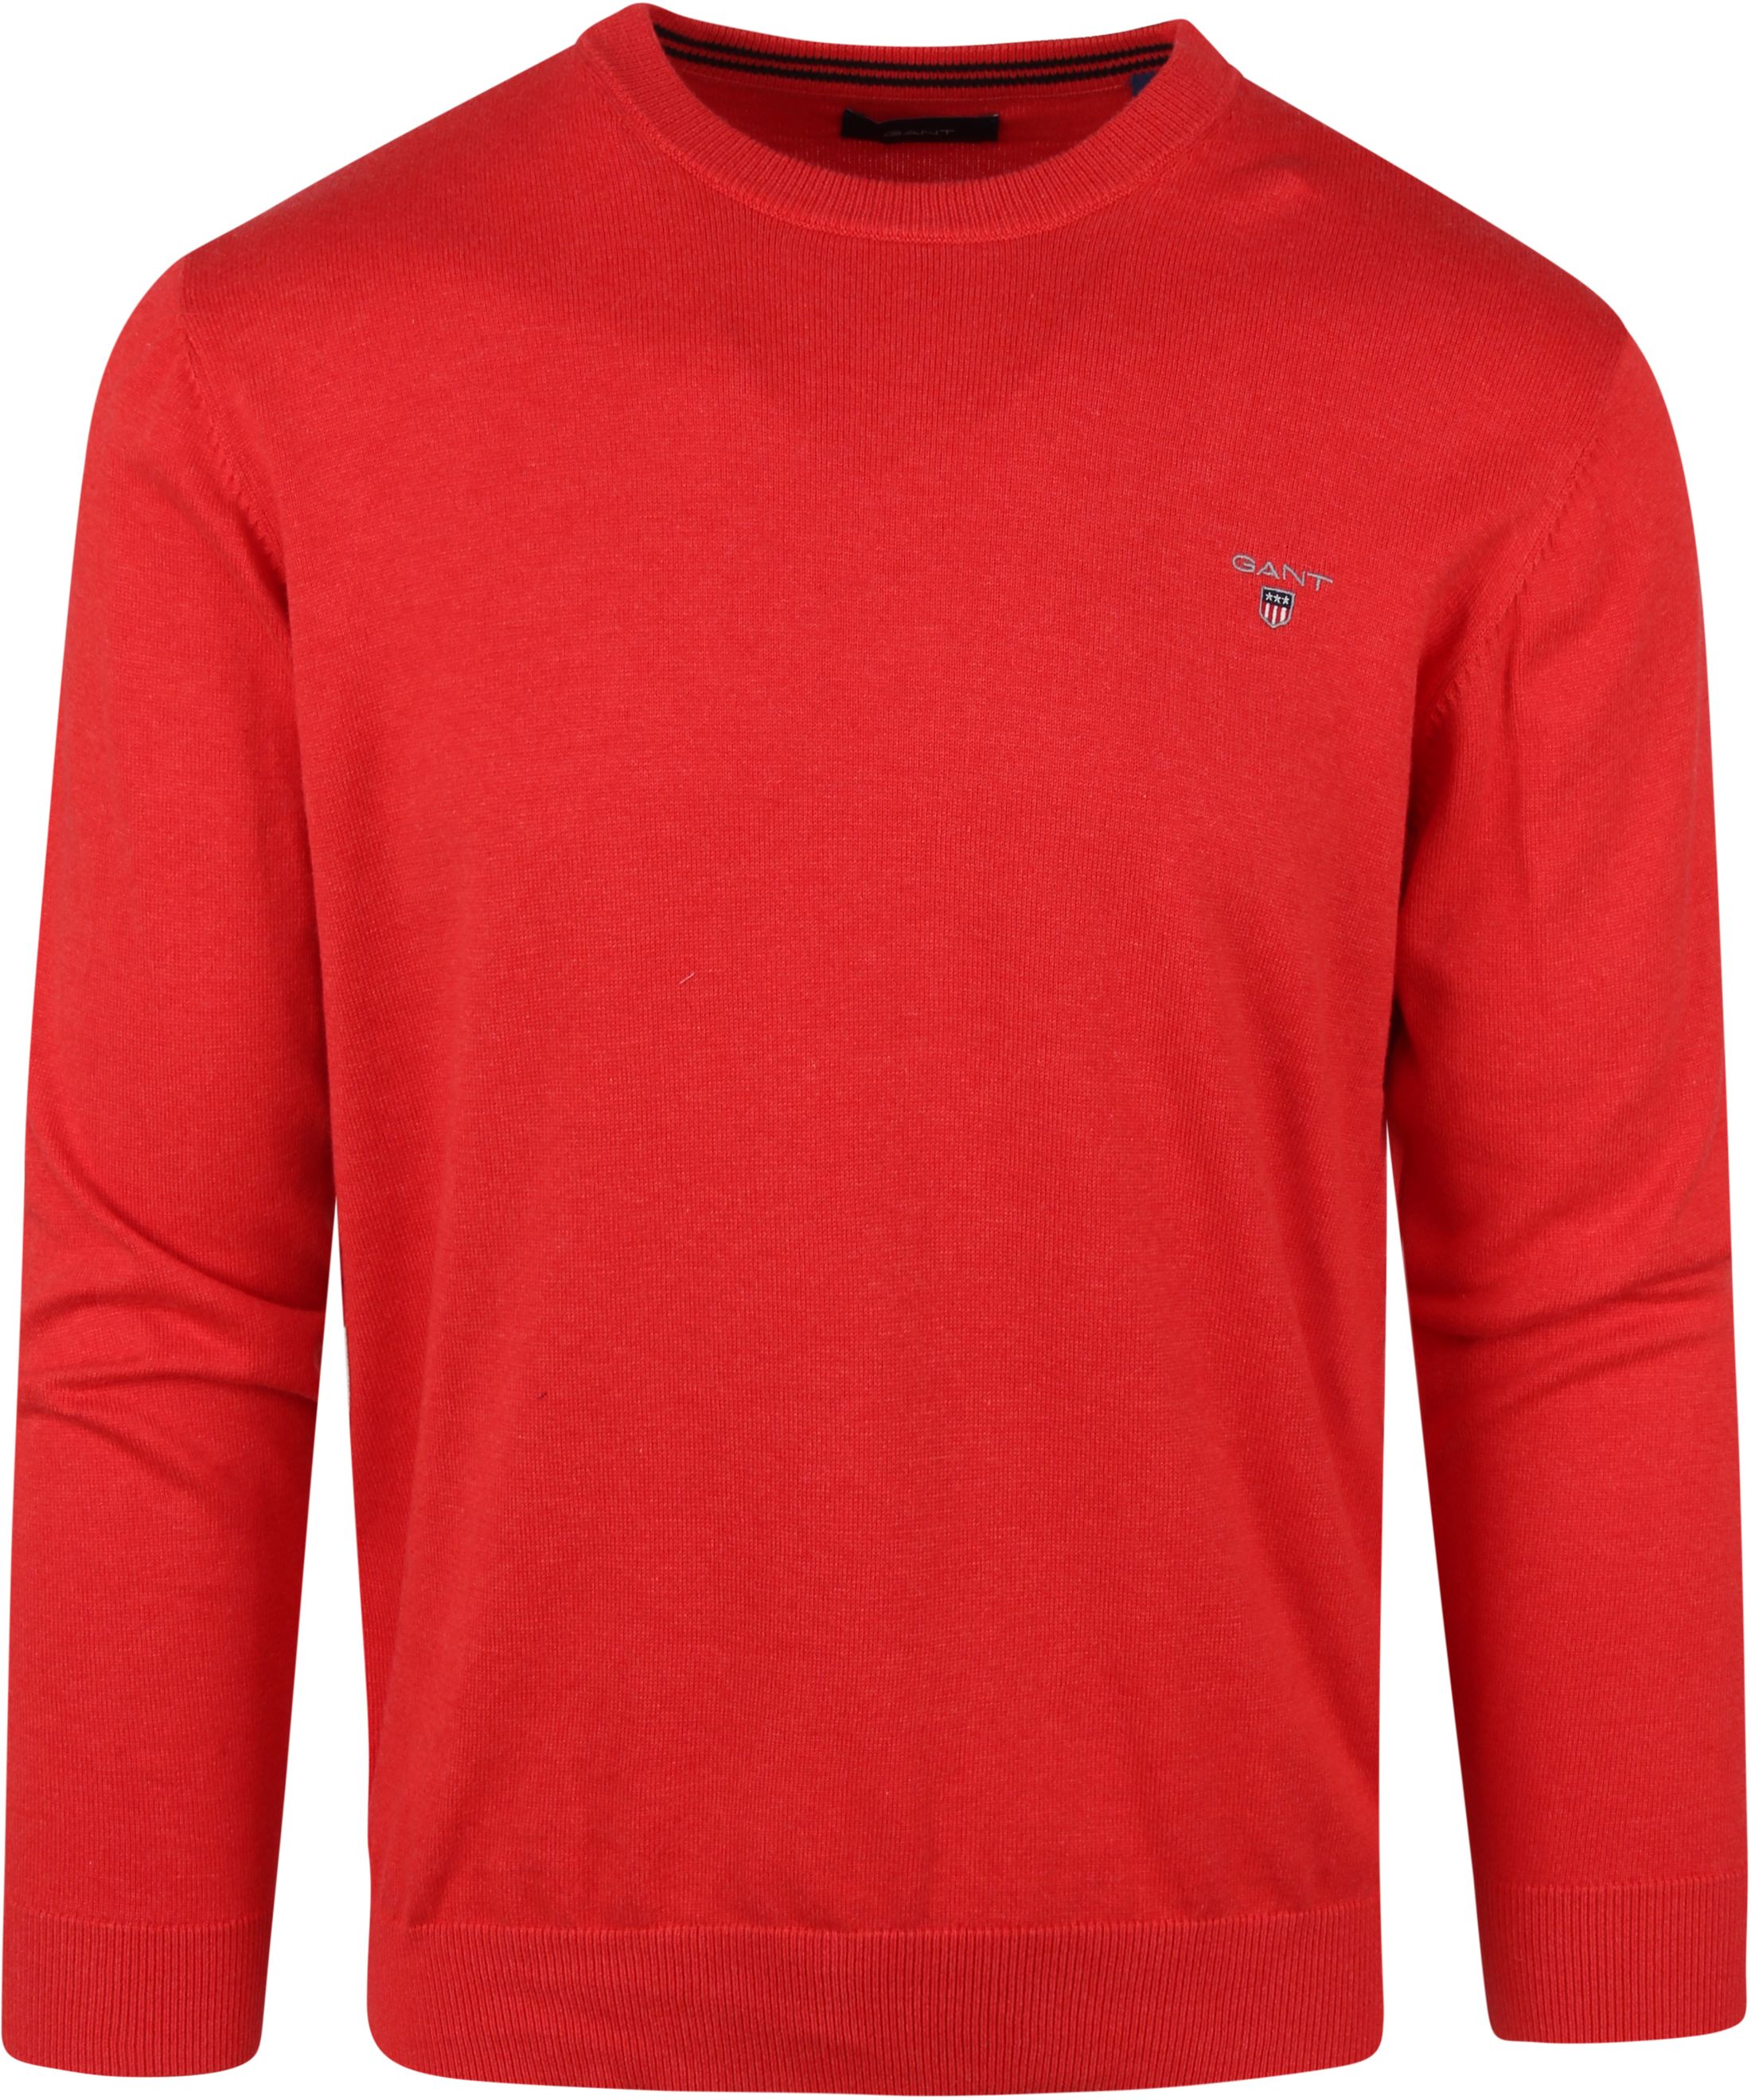 Gant Sweater  Red size M